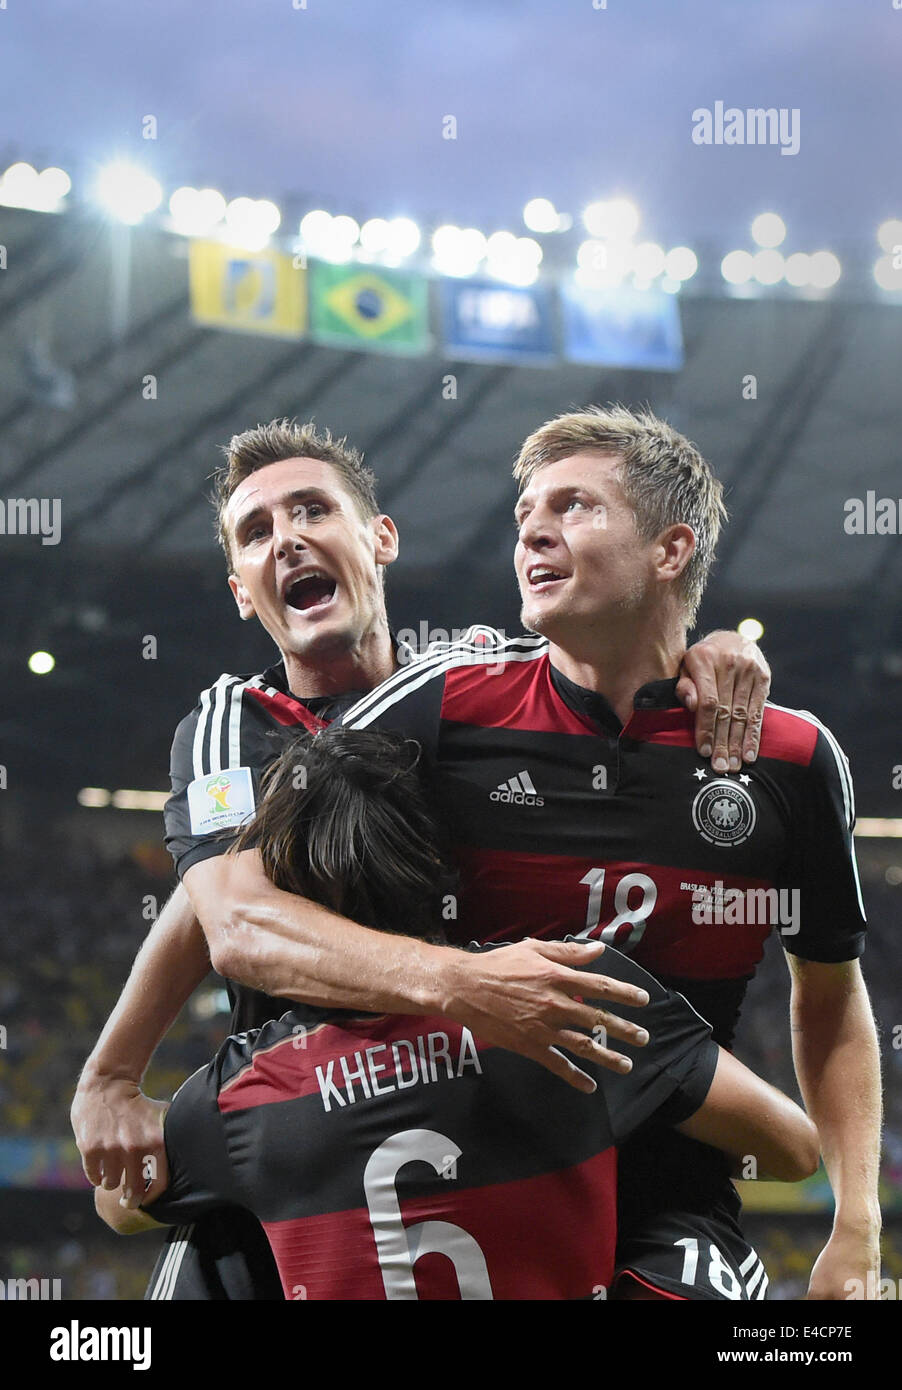 Belo Horizonte, Brazil. 08th July, 2014. Toni Kroos (R) of Germany celebrates with his teammate Miroslav Klose (L) and Sami Khedira after the scoring a goal during the FIFA World Cup 2014 semi-final soccer match between Brazil and Germany at Estadio Mineirao in Belo Horizonte, Brazil, 08 July 2014. Photo: Marcus Brandt/dpa/Alamy Live News Stock Photo